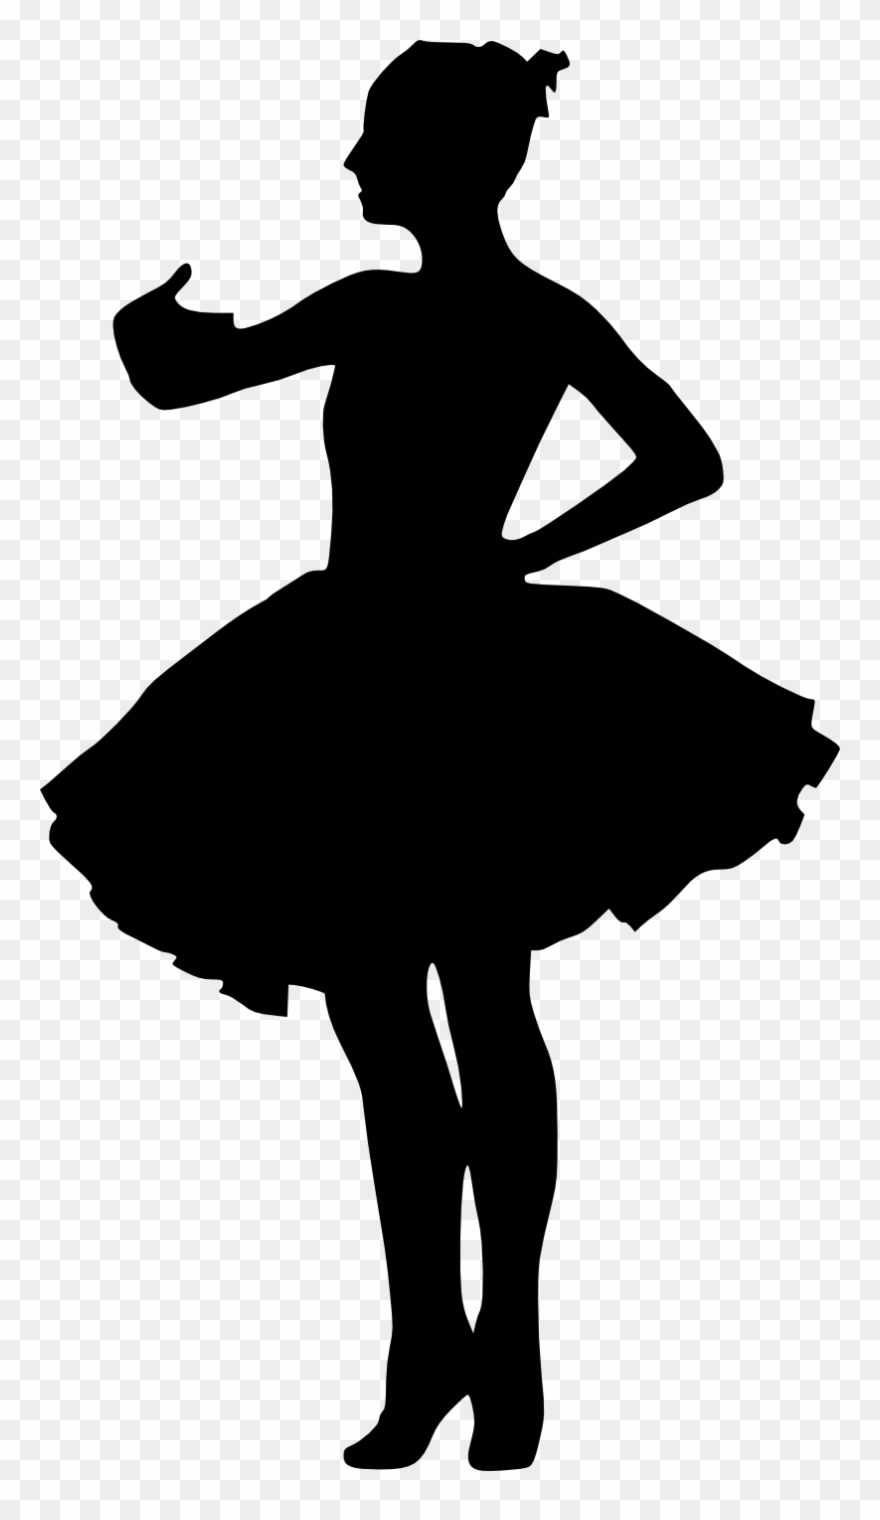 Ballerina Silhouette Png Banner Free Download - Ballerina Png - Free Printable Ballerina Silhouette